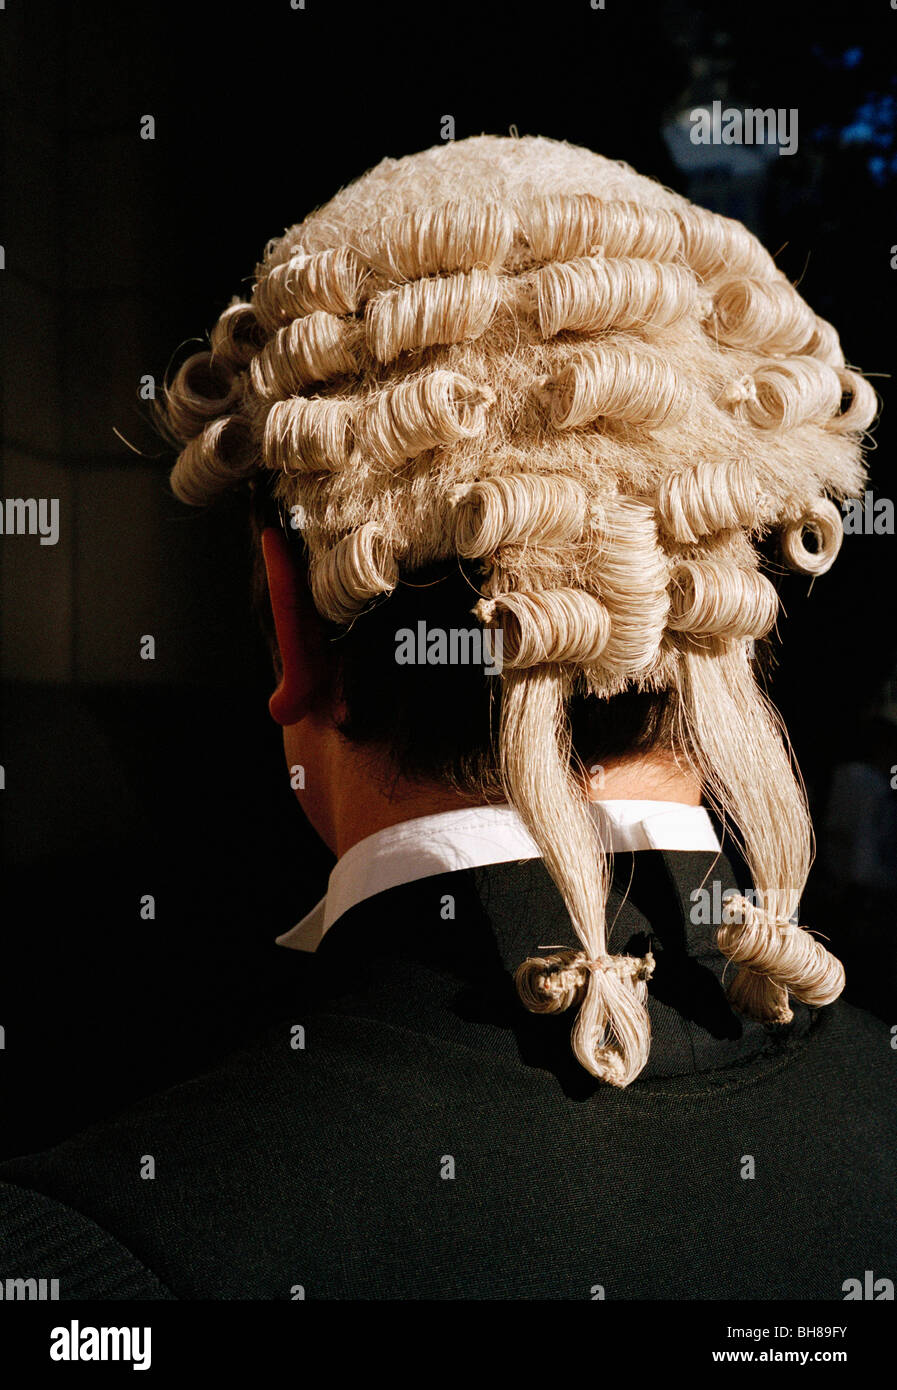 Rear view of a barrister wearing a wig Stock Photo